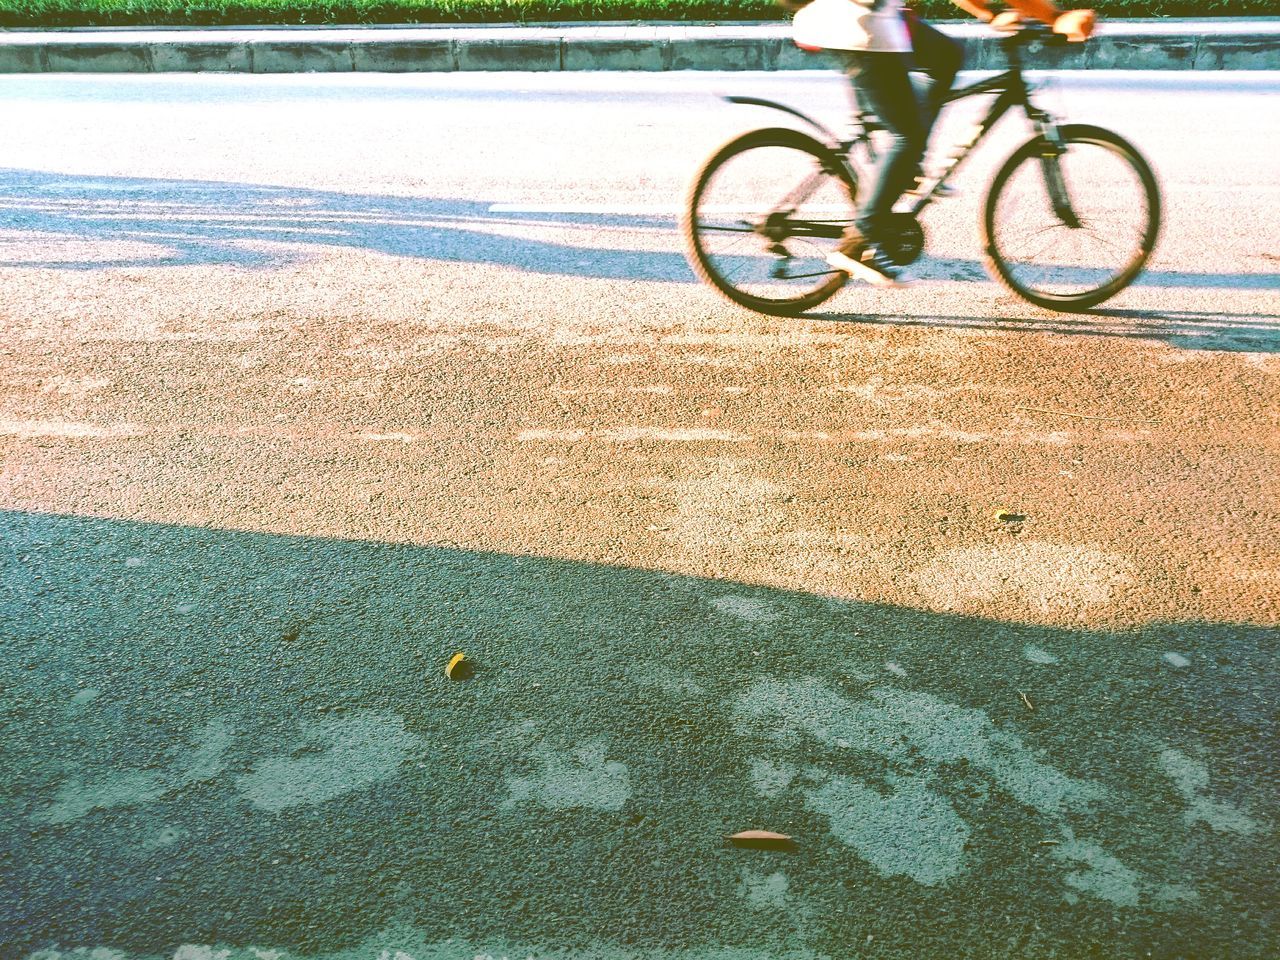 LOW SECTION OF PEOPLE RIDING BICYCLE ON STREET